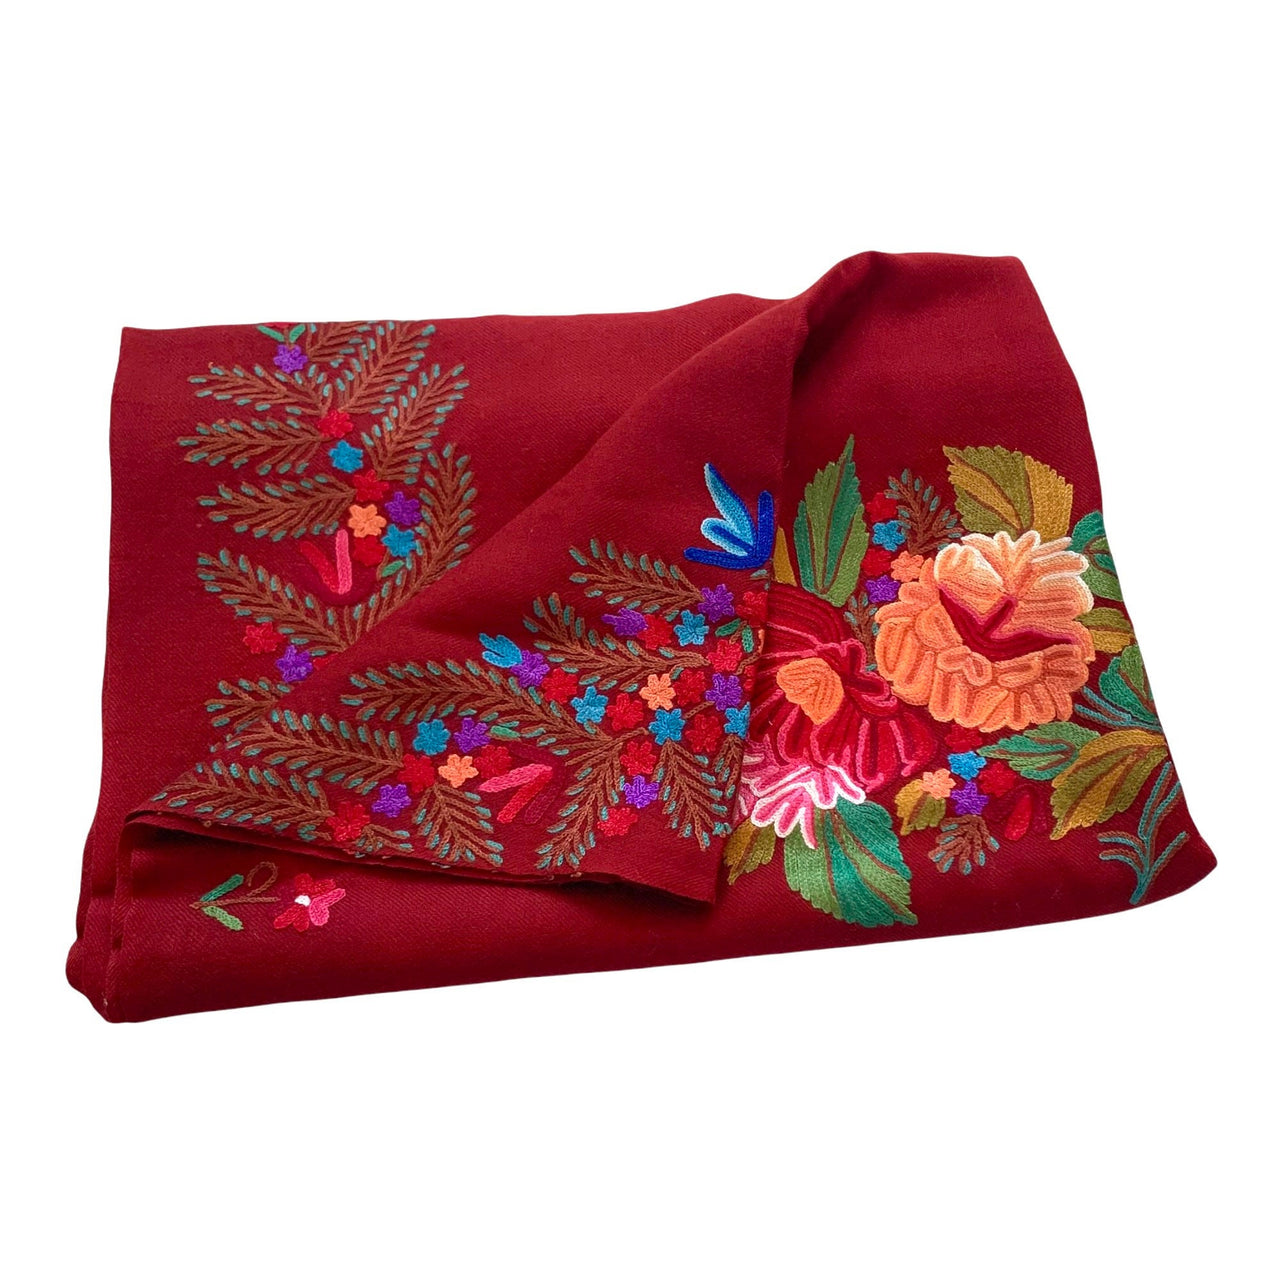 Burgundy Hand Embroidered Floral Scarf Shawl Wrap Stole